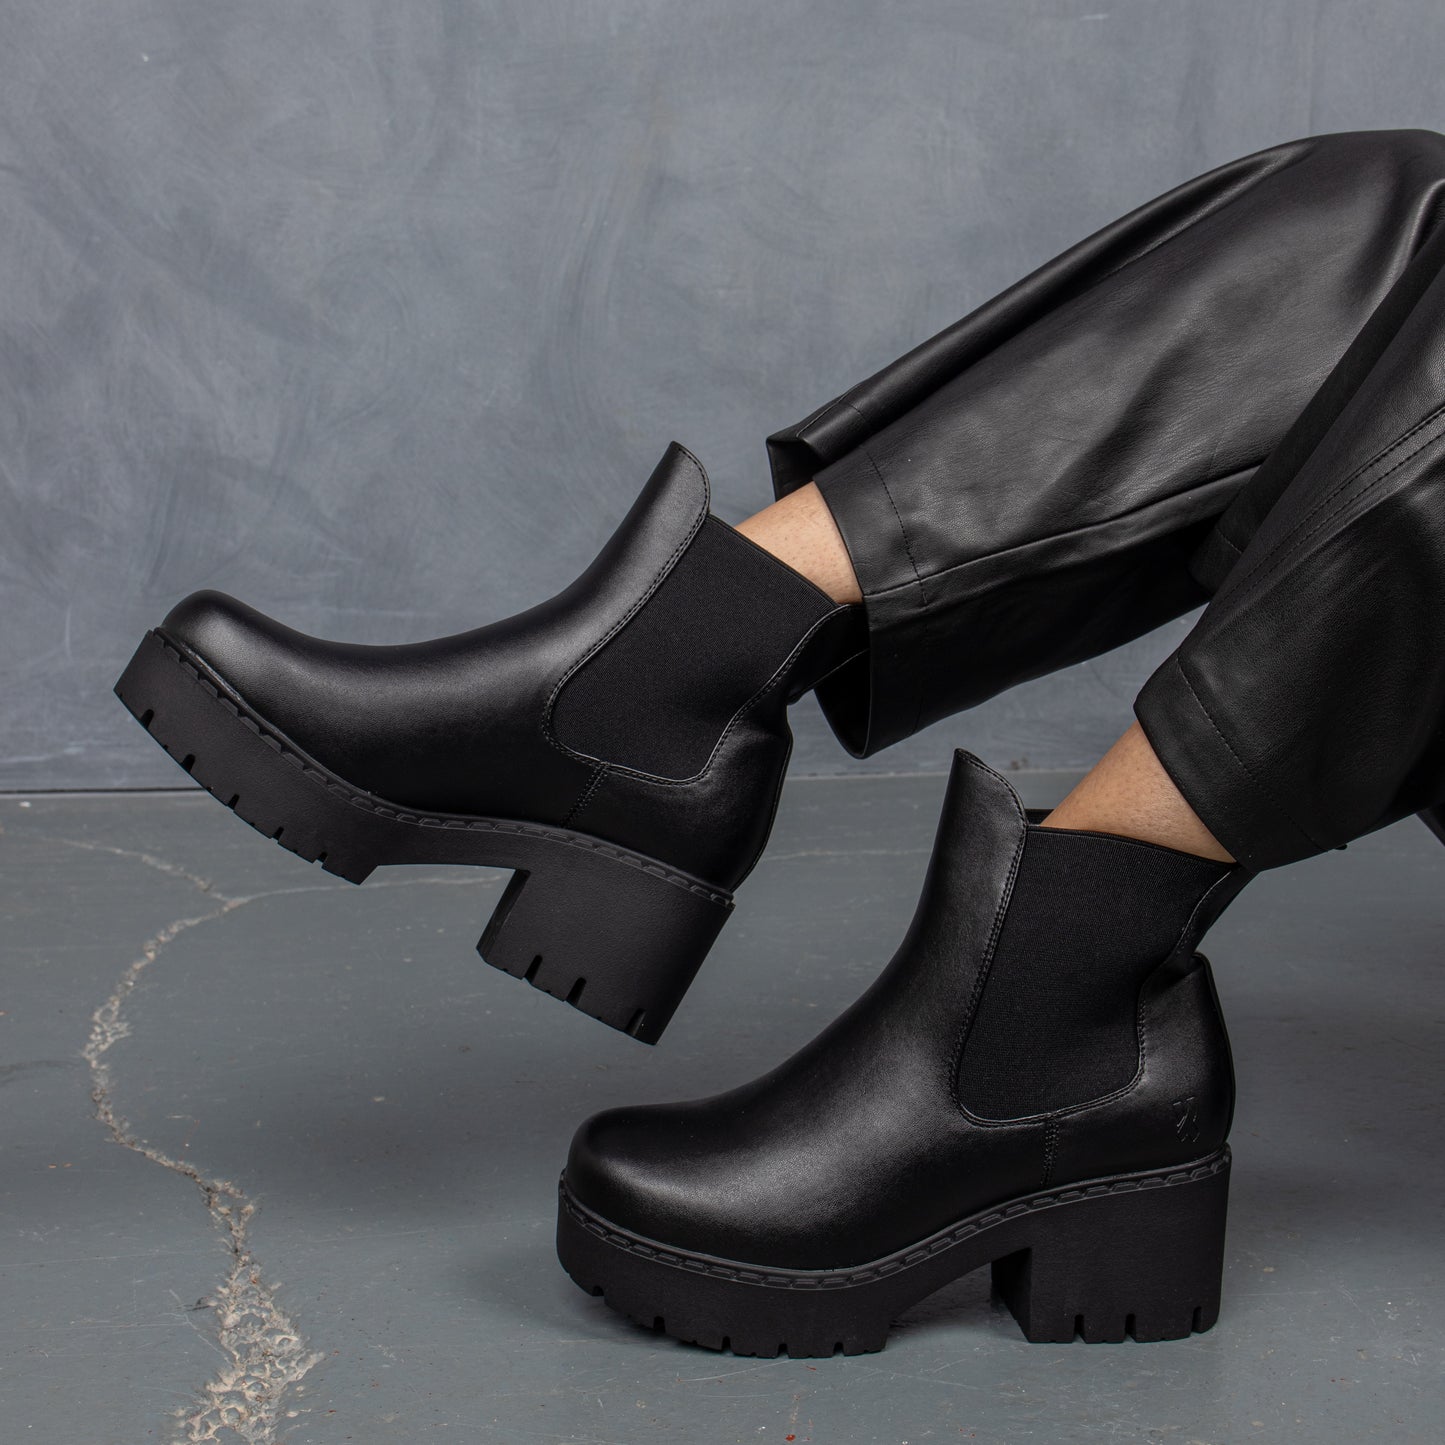 Orson Switch Chelsea Boots - Ankle Boots - KOI Footwear - Black - Side Left View